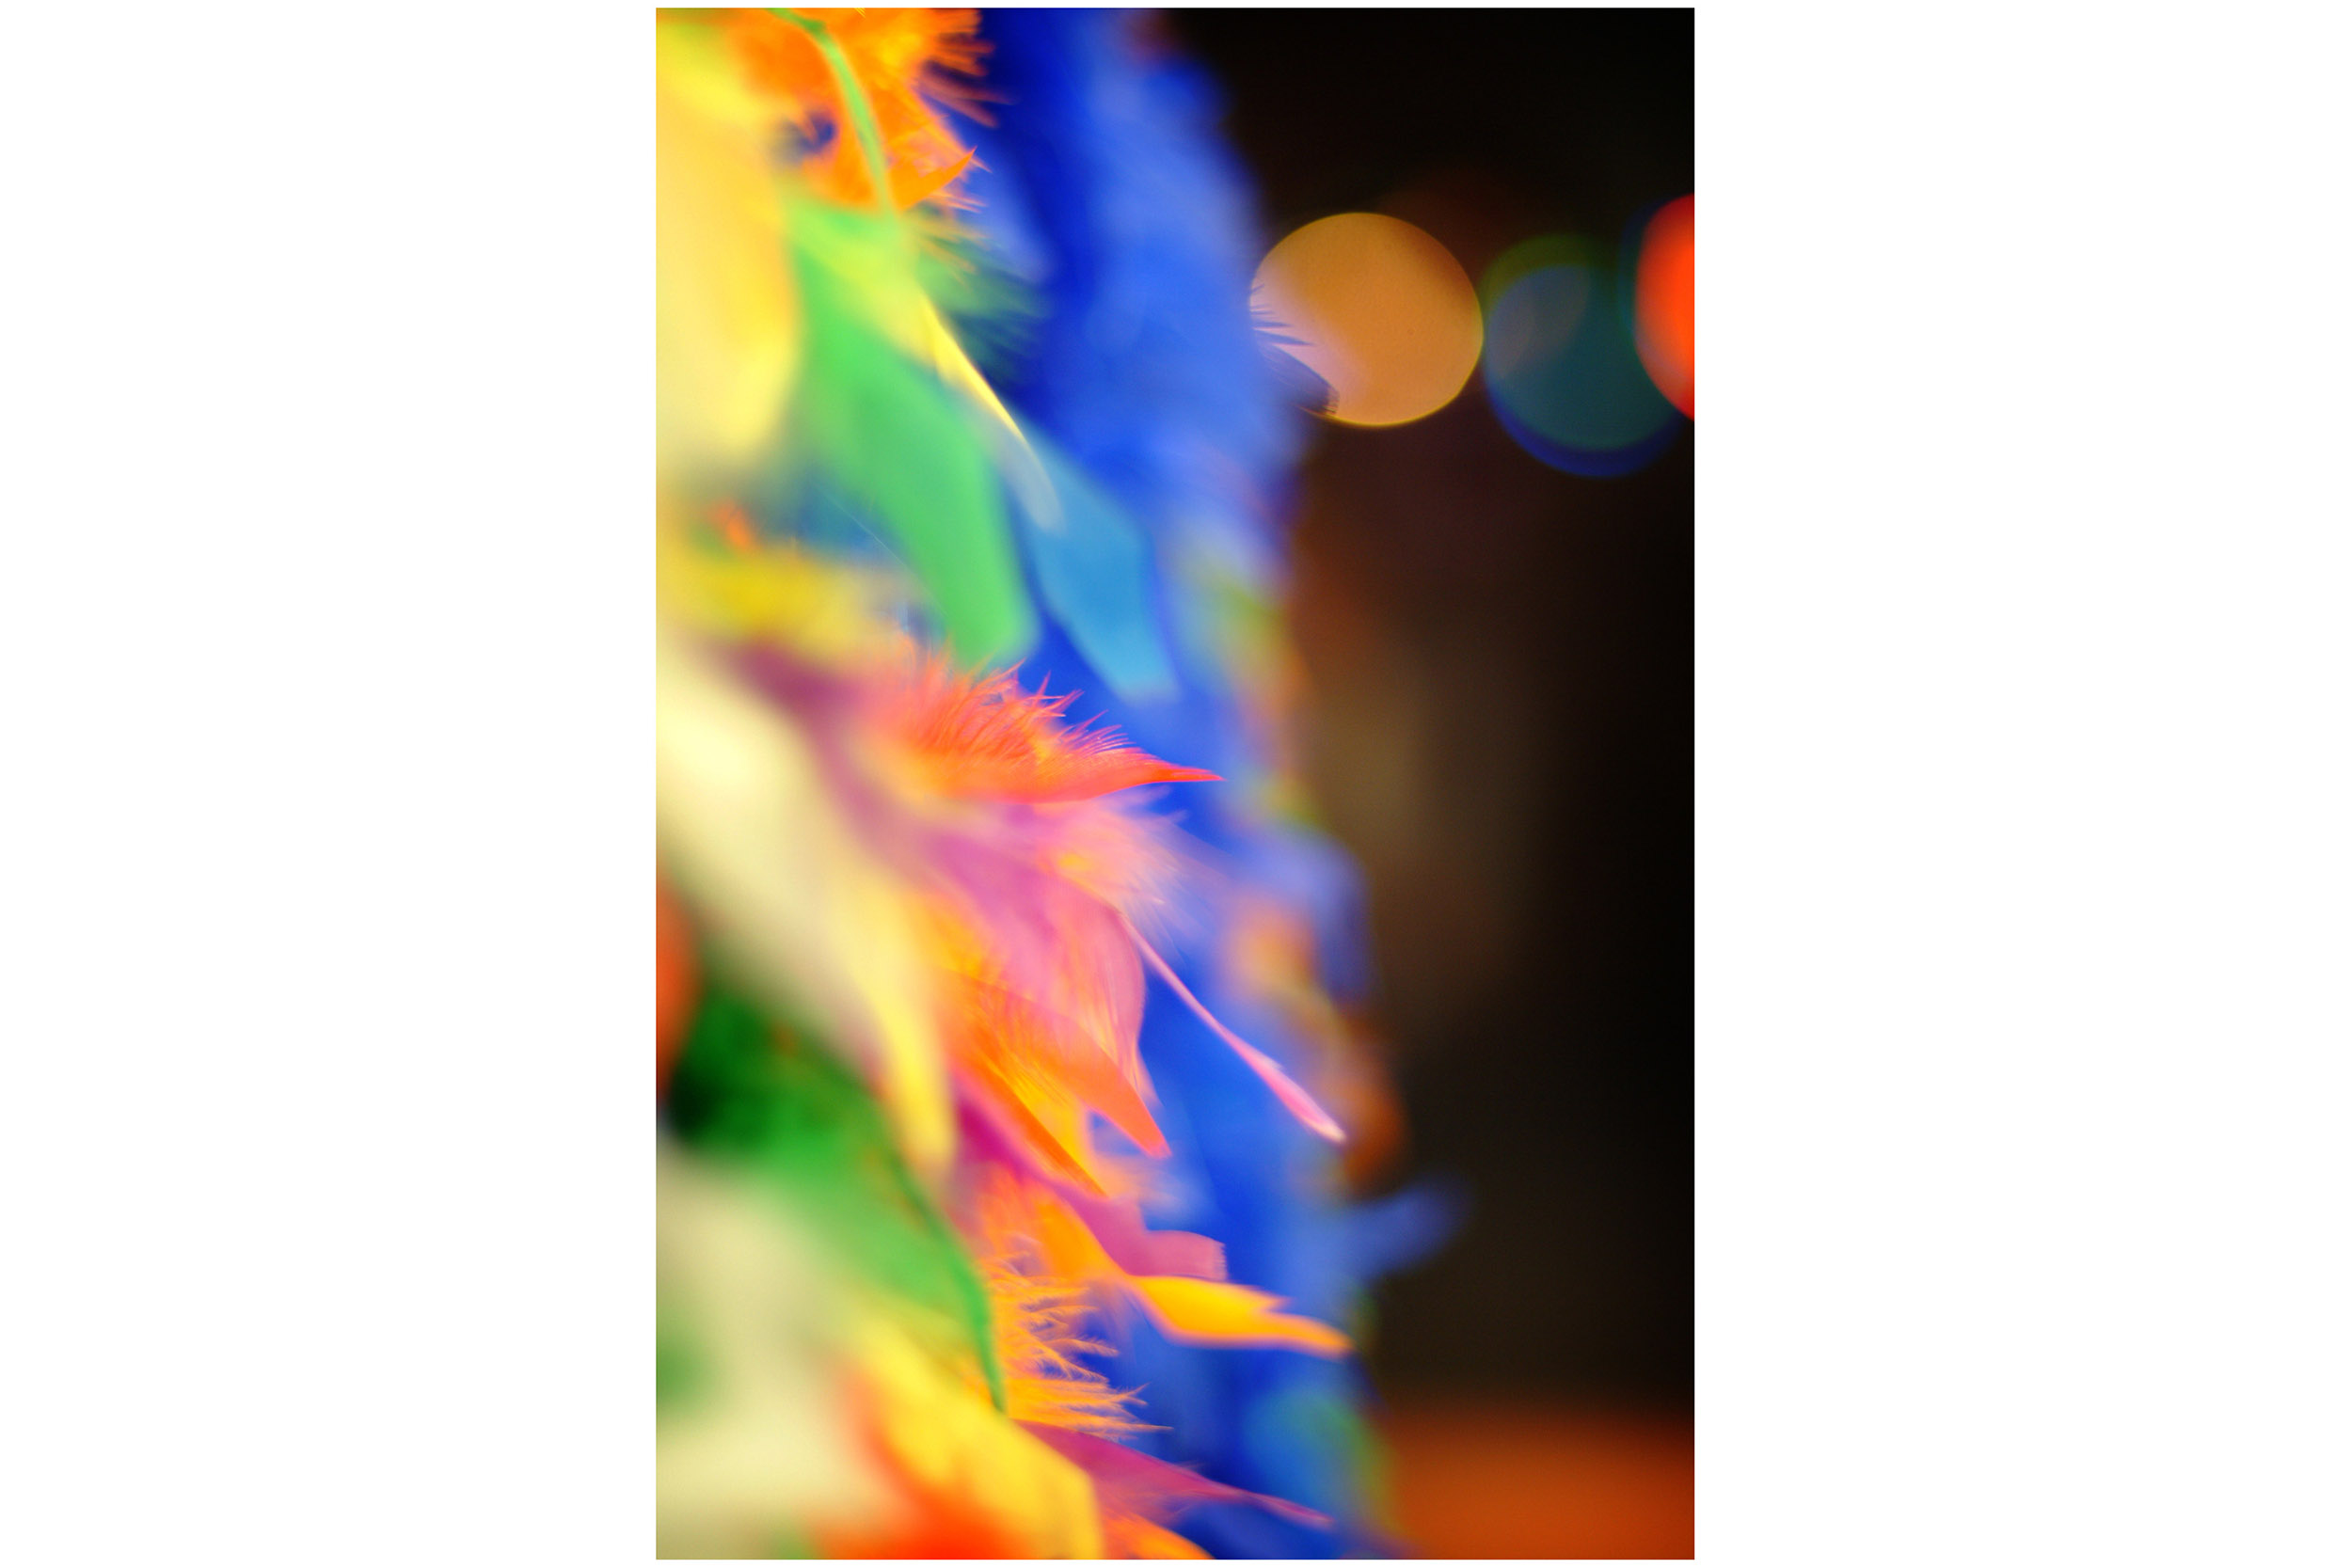 Rainbows, New Orleans-style with colorful feathers